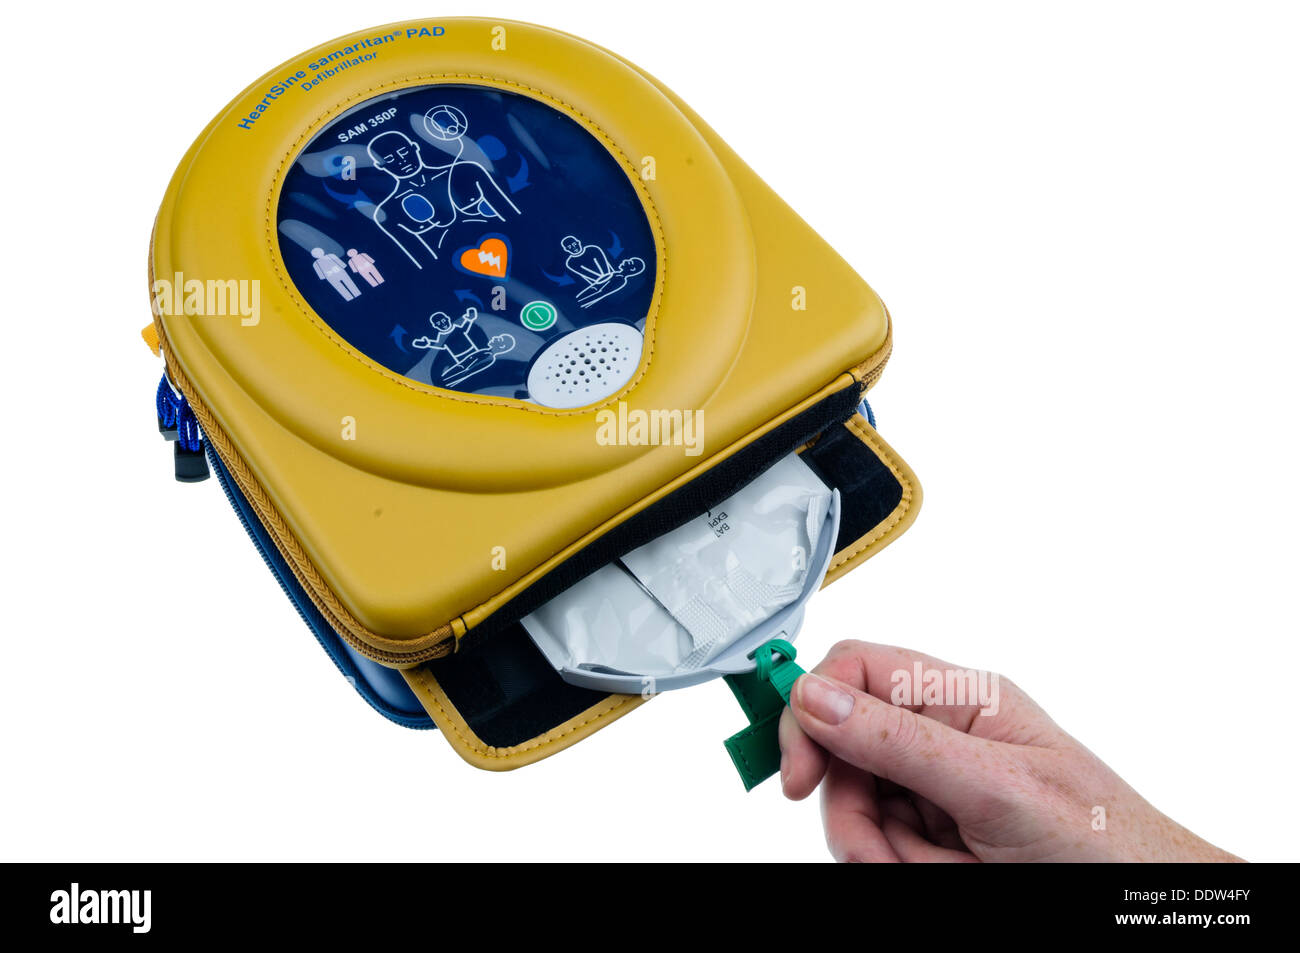 Woman removes the pads from a Heartsine SAM350 automatic defibrillator Stock Photo